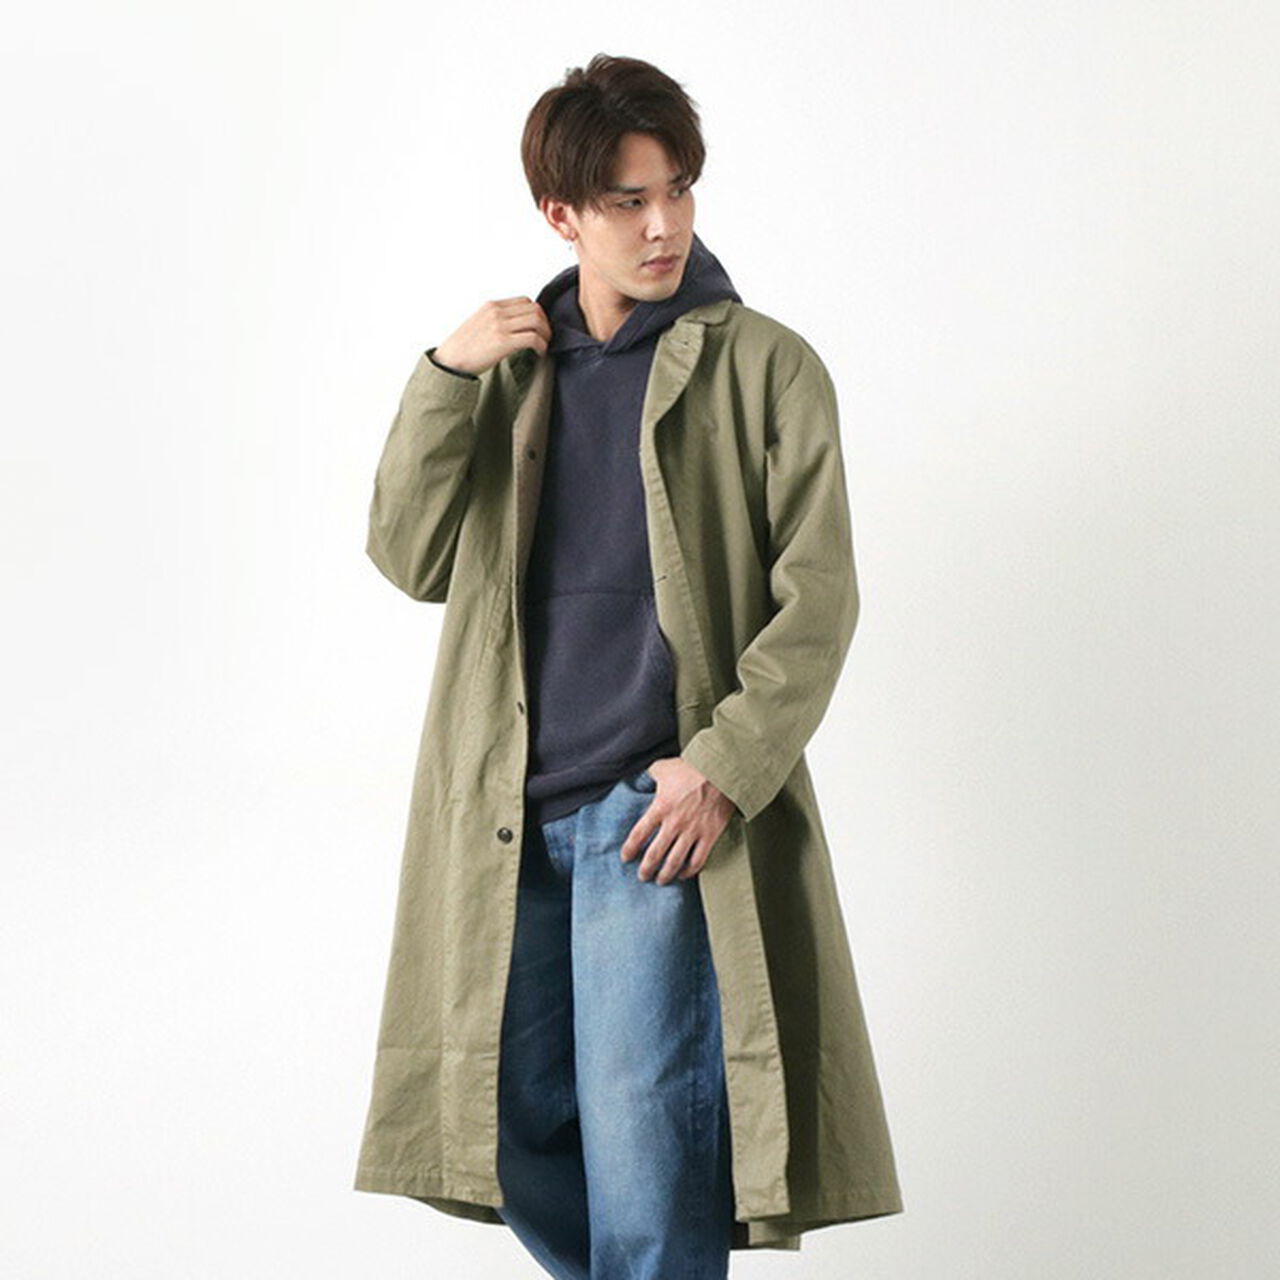 Chino Cloth Overcoat,LightOlive, large image number 0